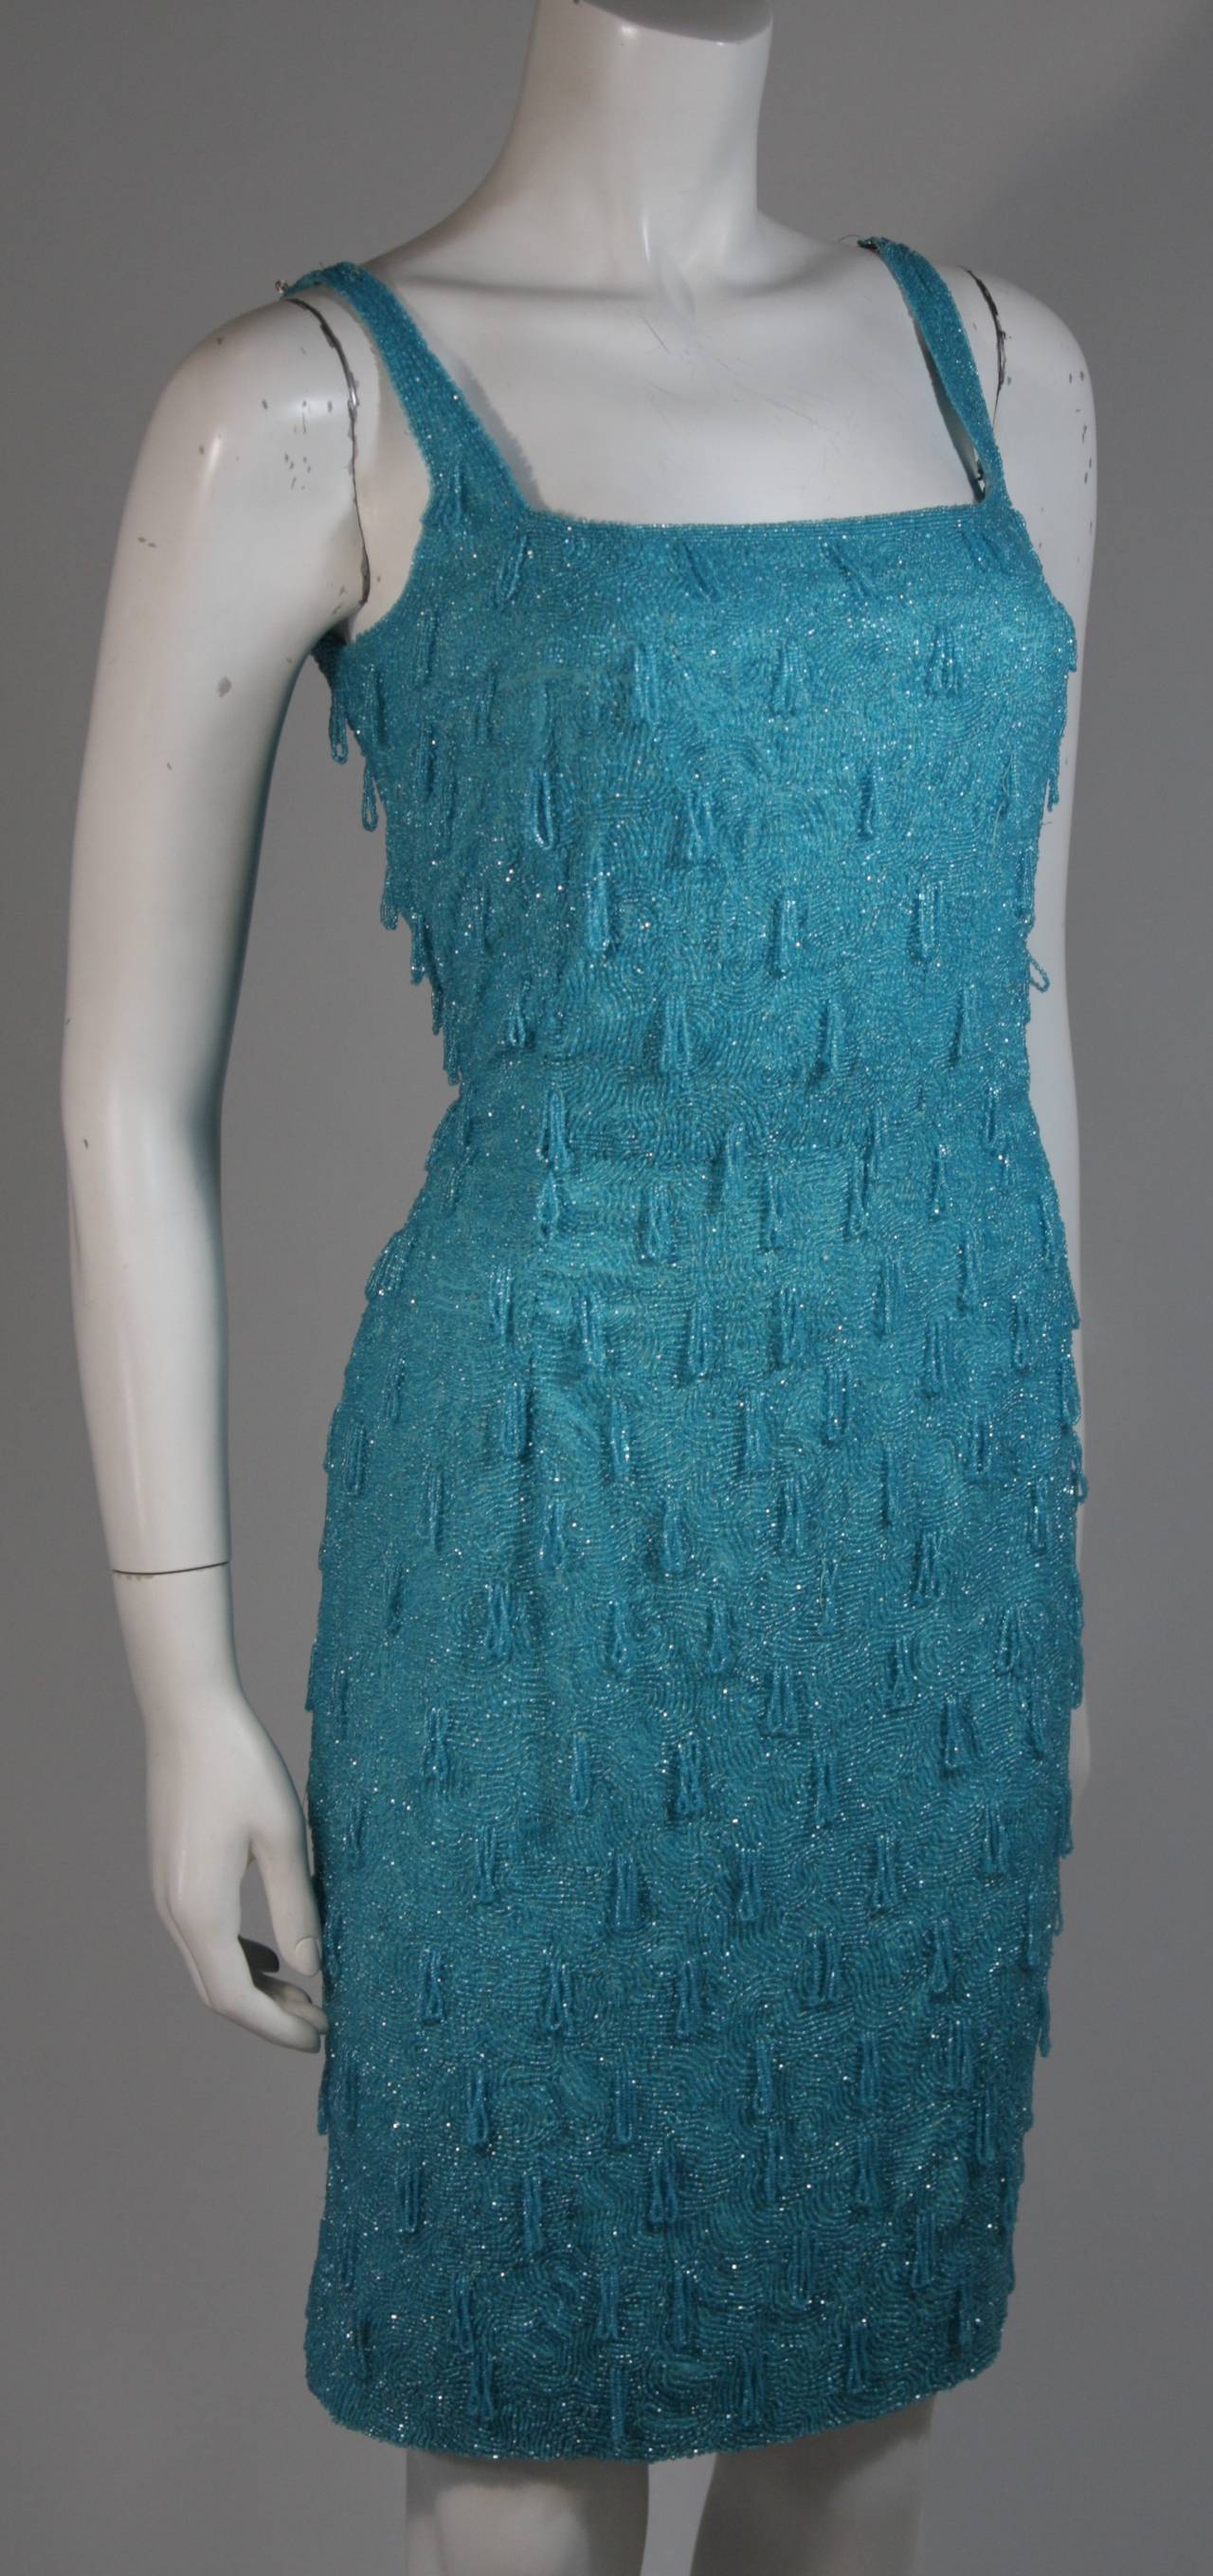 1960's Heavily Beaded Aqua Cocktail Dress Size Medium In Excellent Condition For Sale In Los Angeles, CA